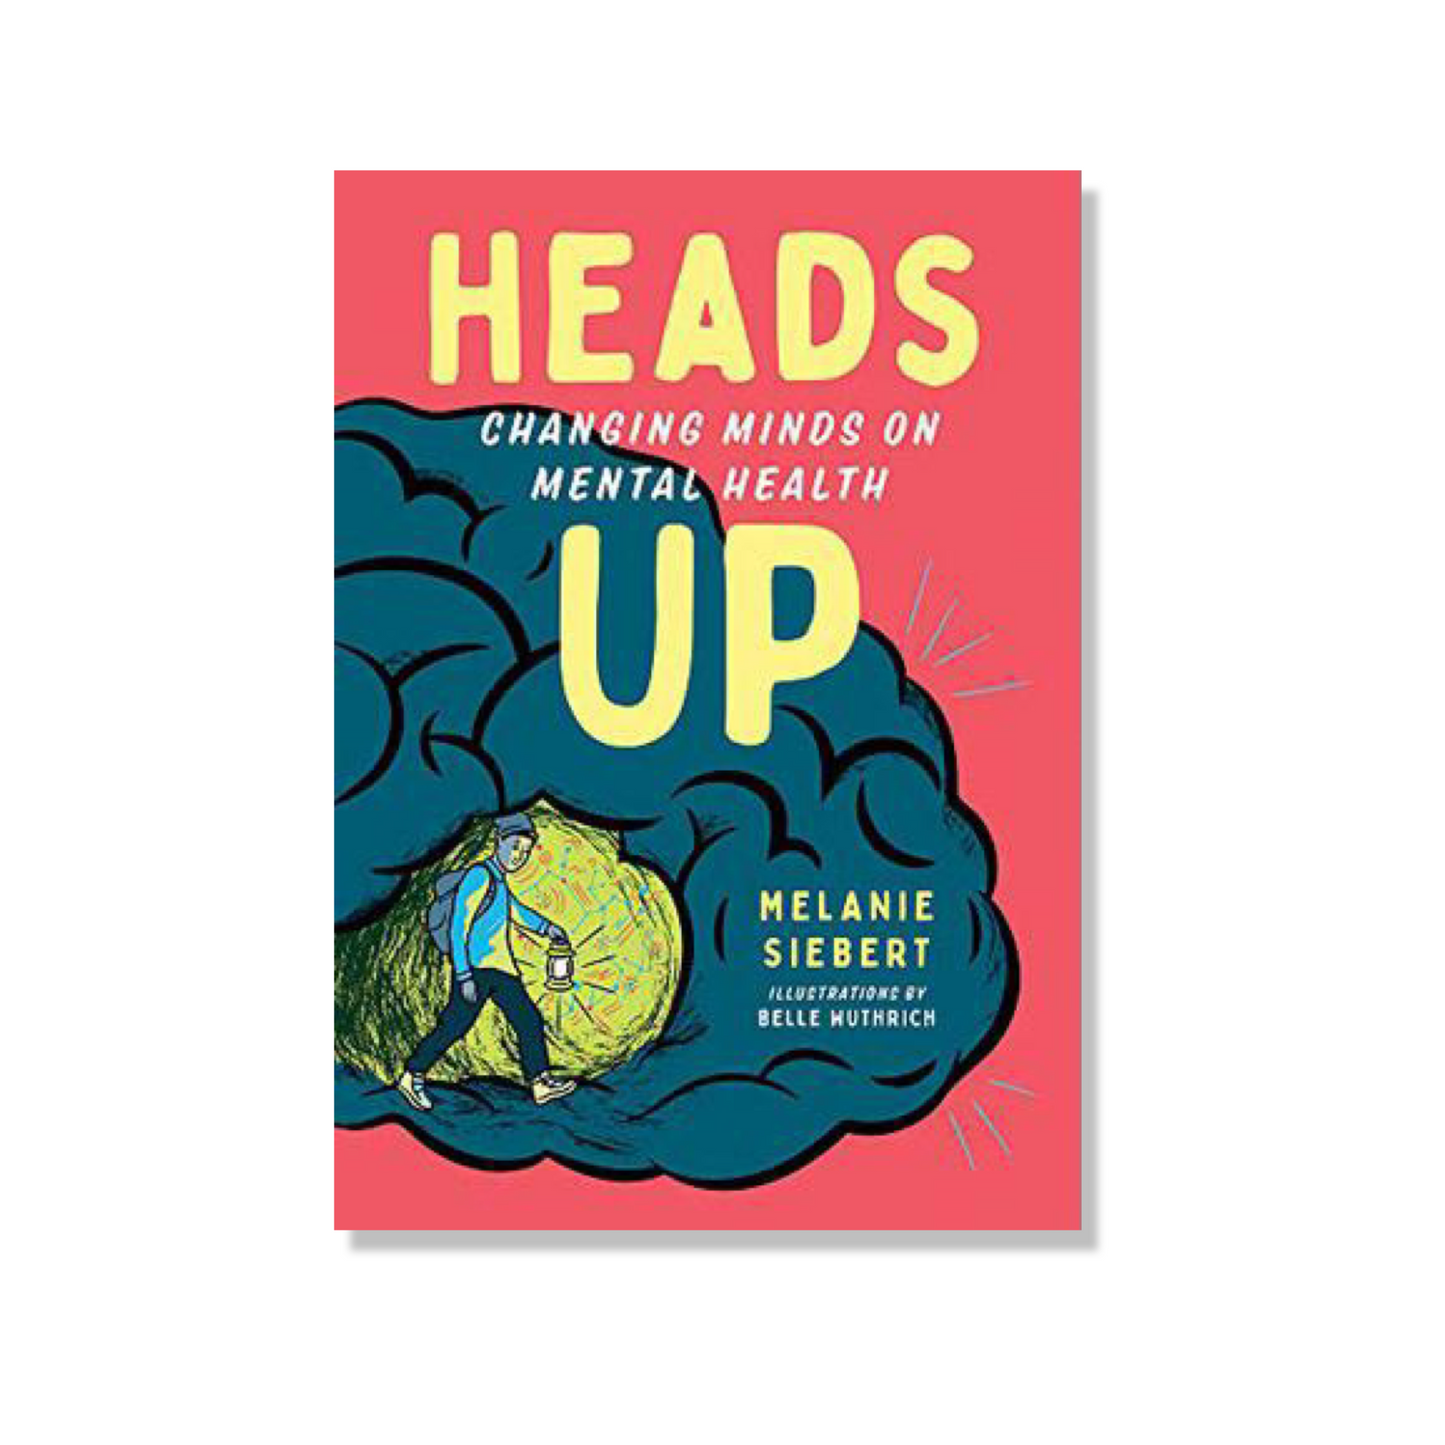 Heads Up: Changing Minds on Mental Health